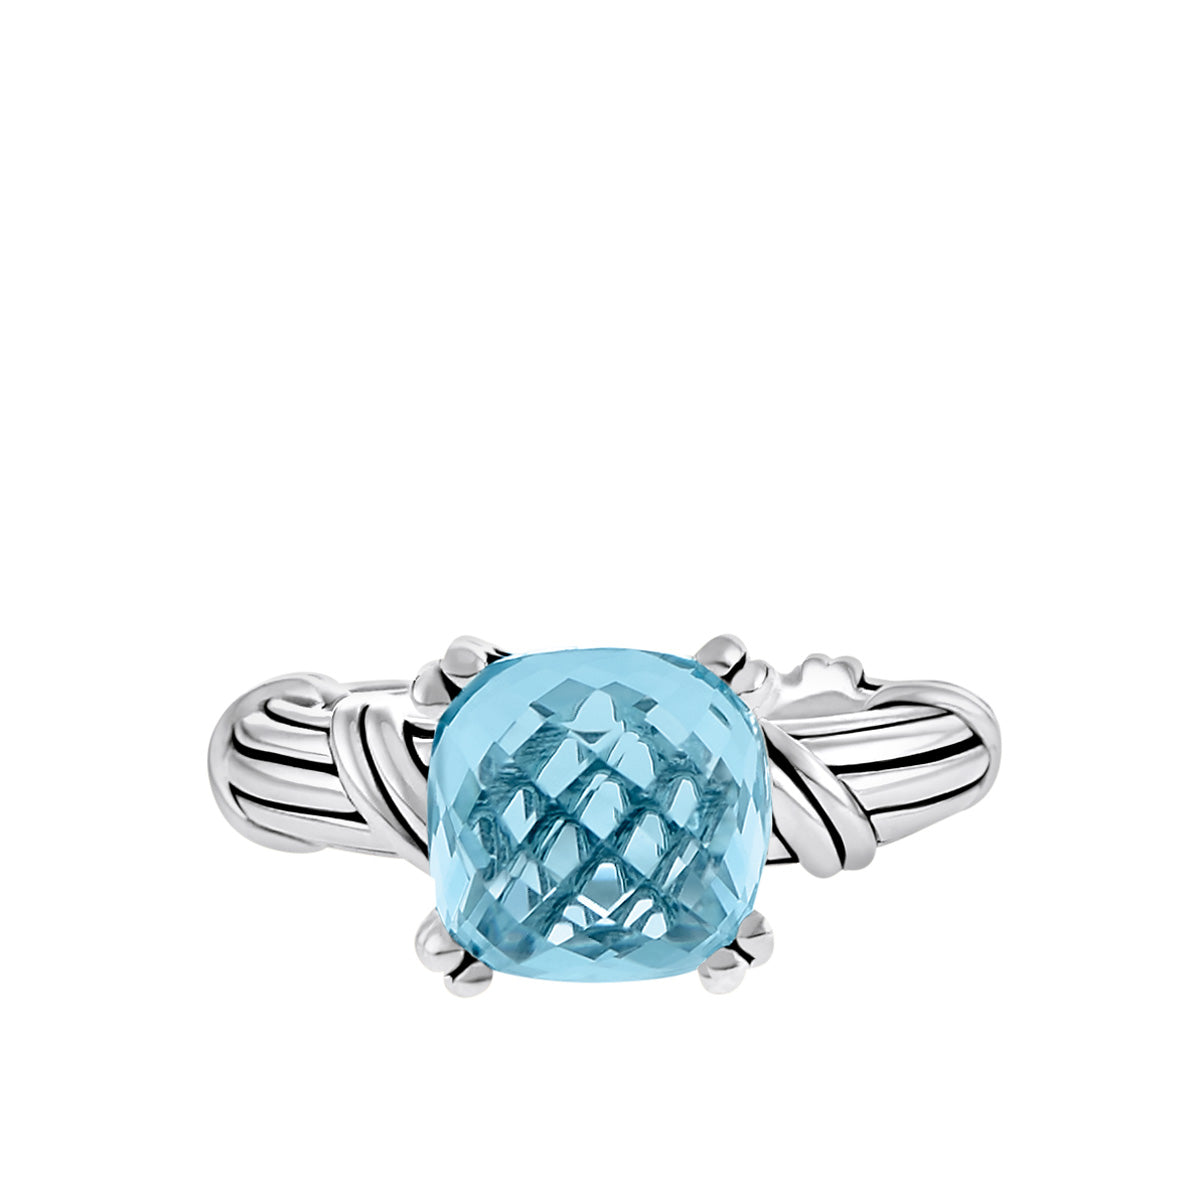 Fantasies Blue Topaz Cocktail Ring in sterling silver 10mm